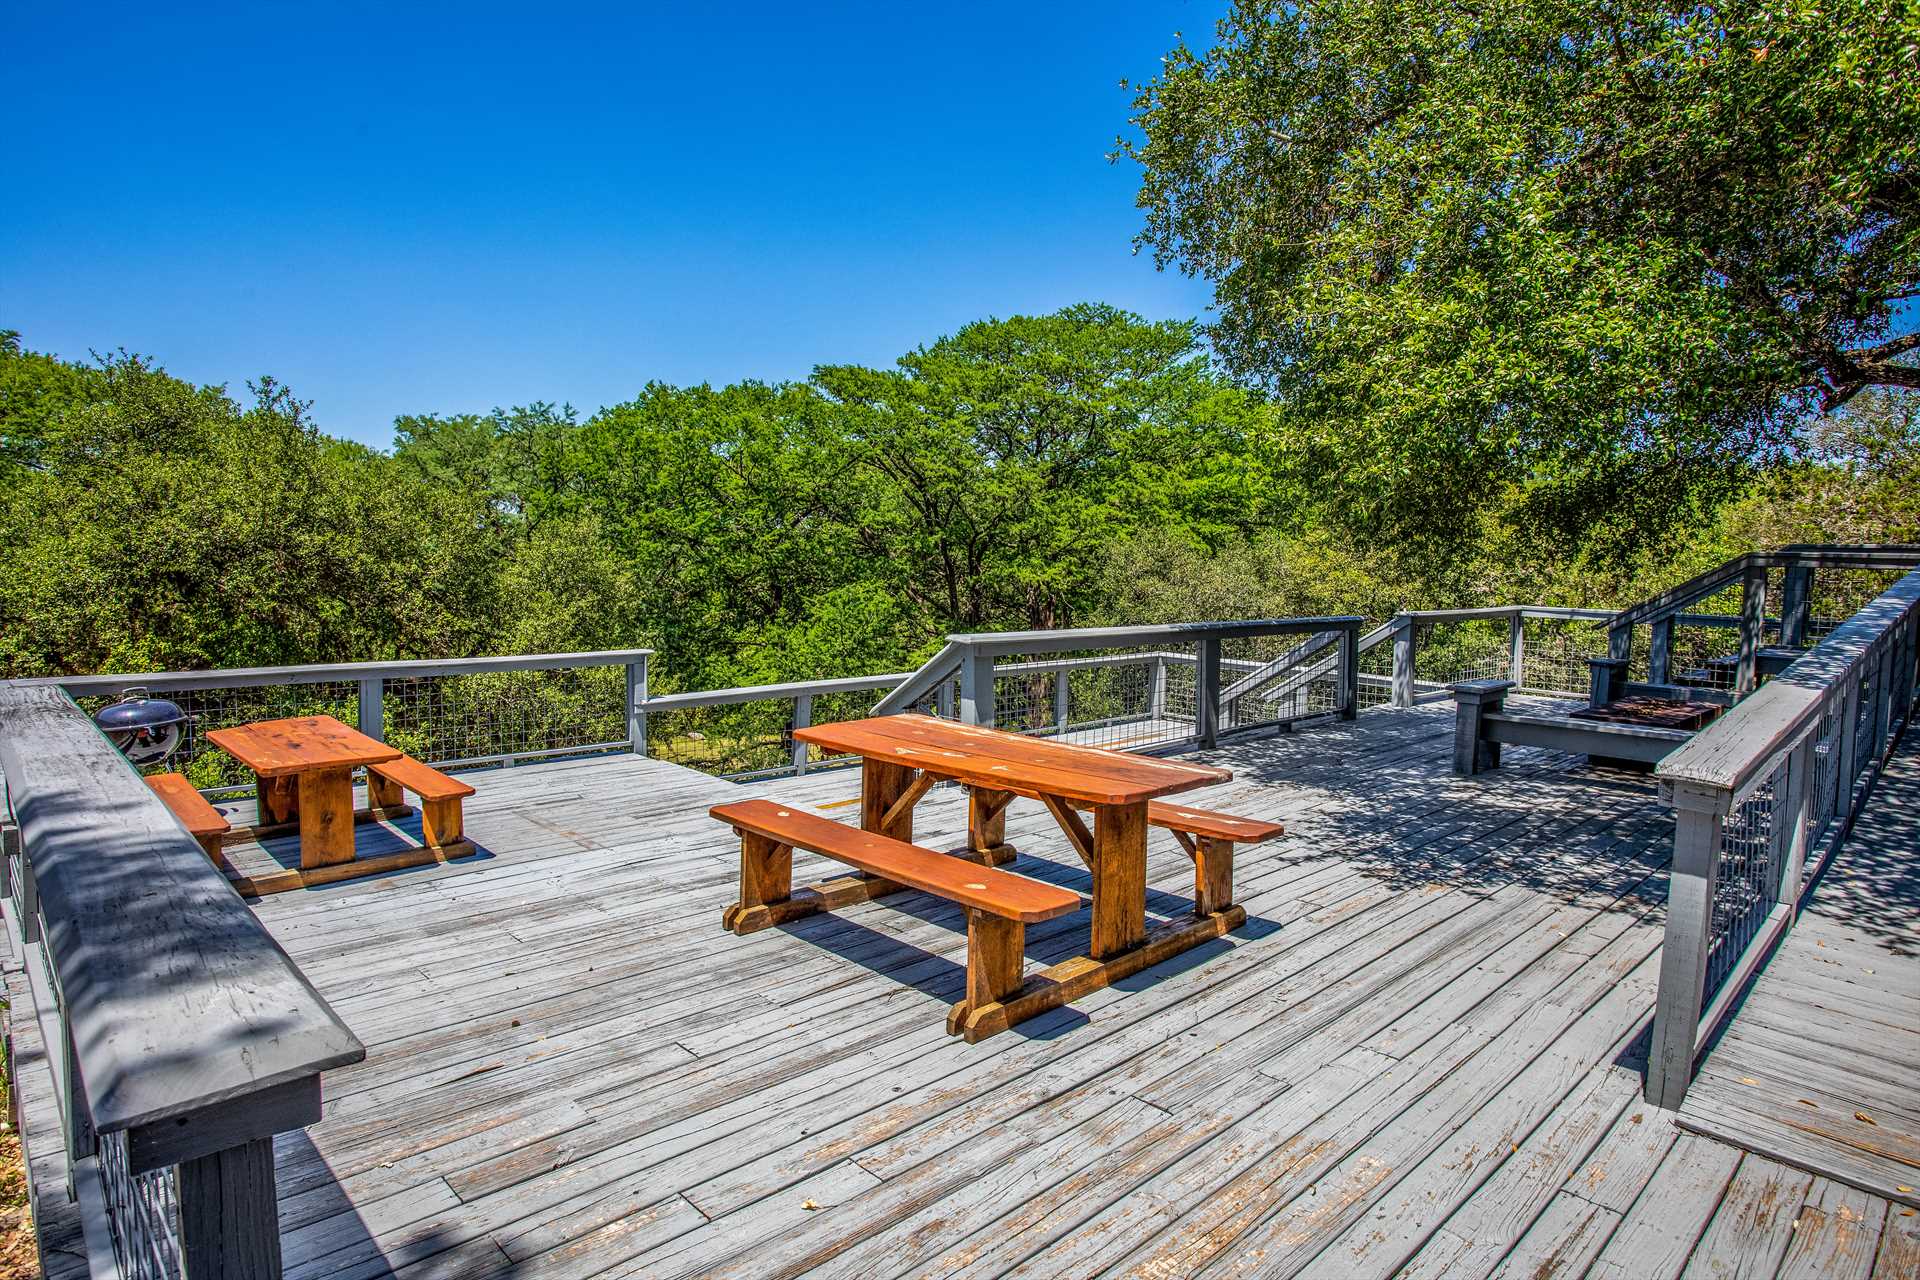                                                 The two-level deck here is HUGE, with plenty of room for everyone to admire the mountain views, stargaze, and simply enjoy great company!